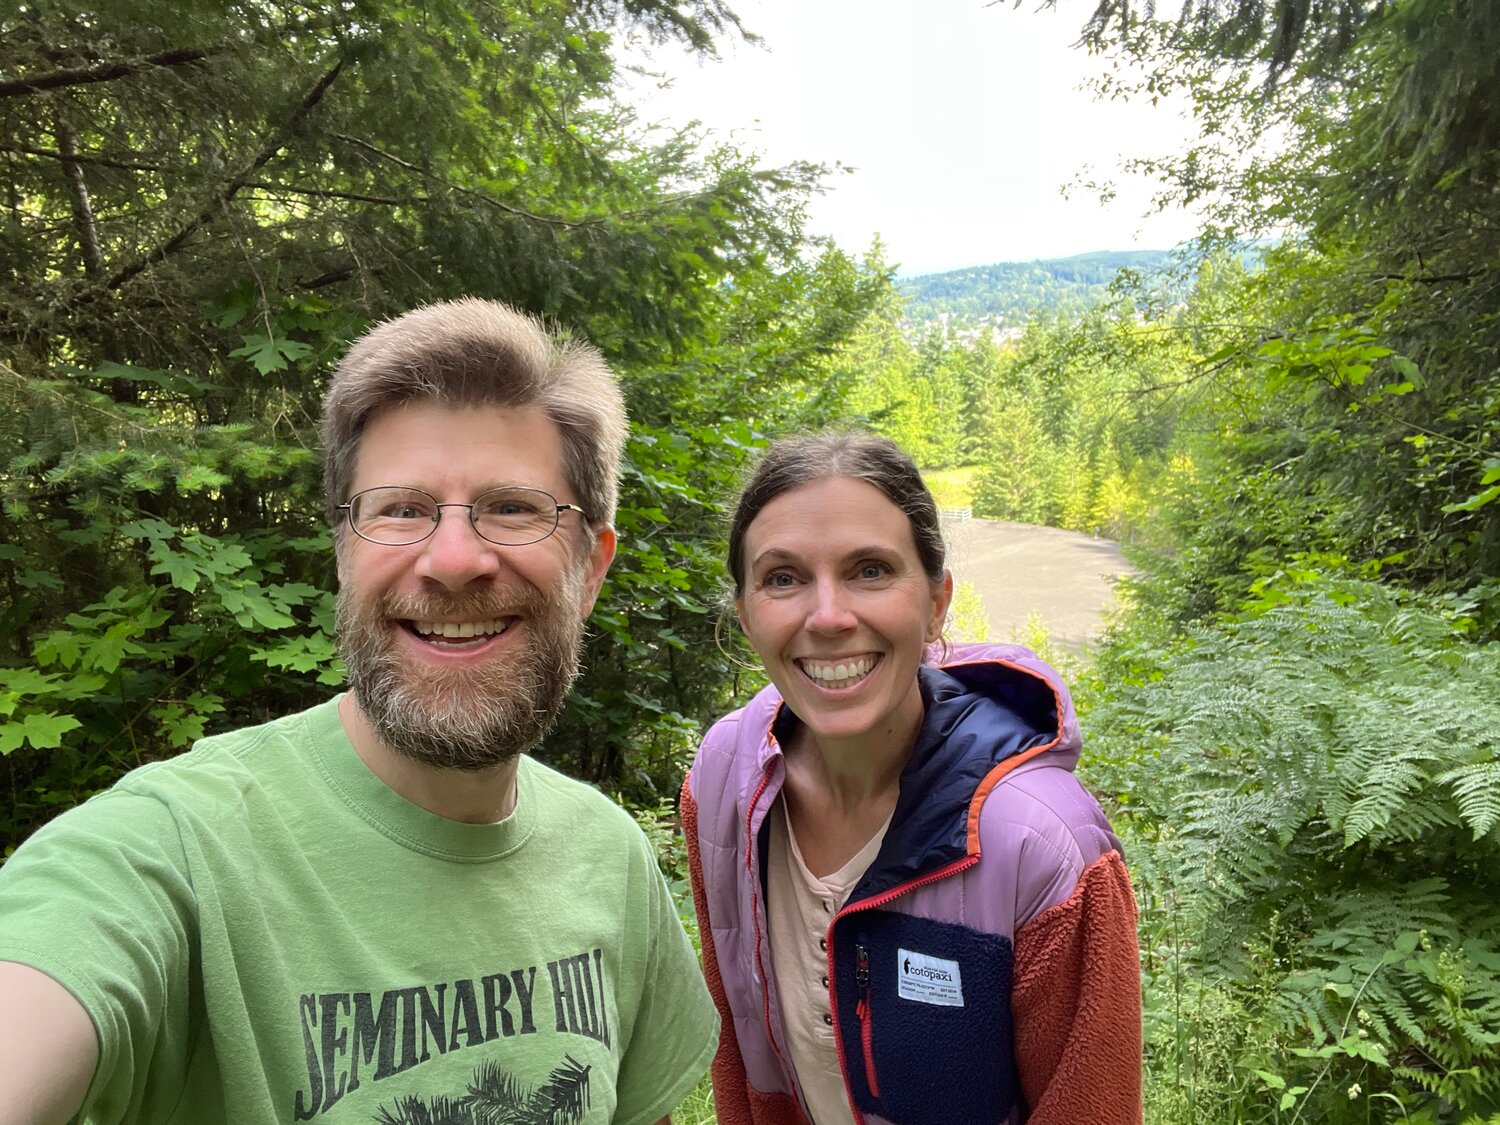 Chronicle columnist Brian Mittge and Shawna Herriford, executive director of Blue Zones Activate Lewis County, during a hike to the top of the Seminary Hill Natural Area in Centralia in June. (Photo: Brian Mittge)